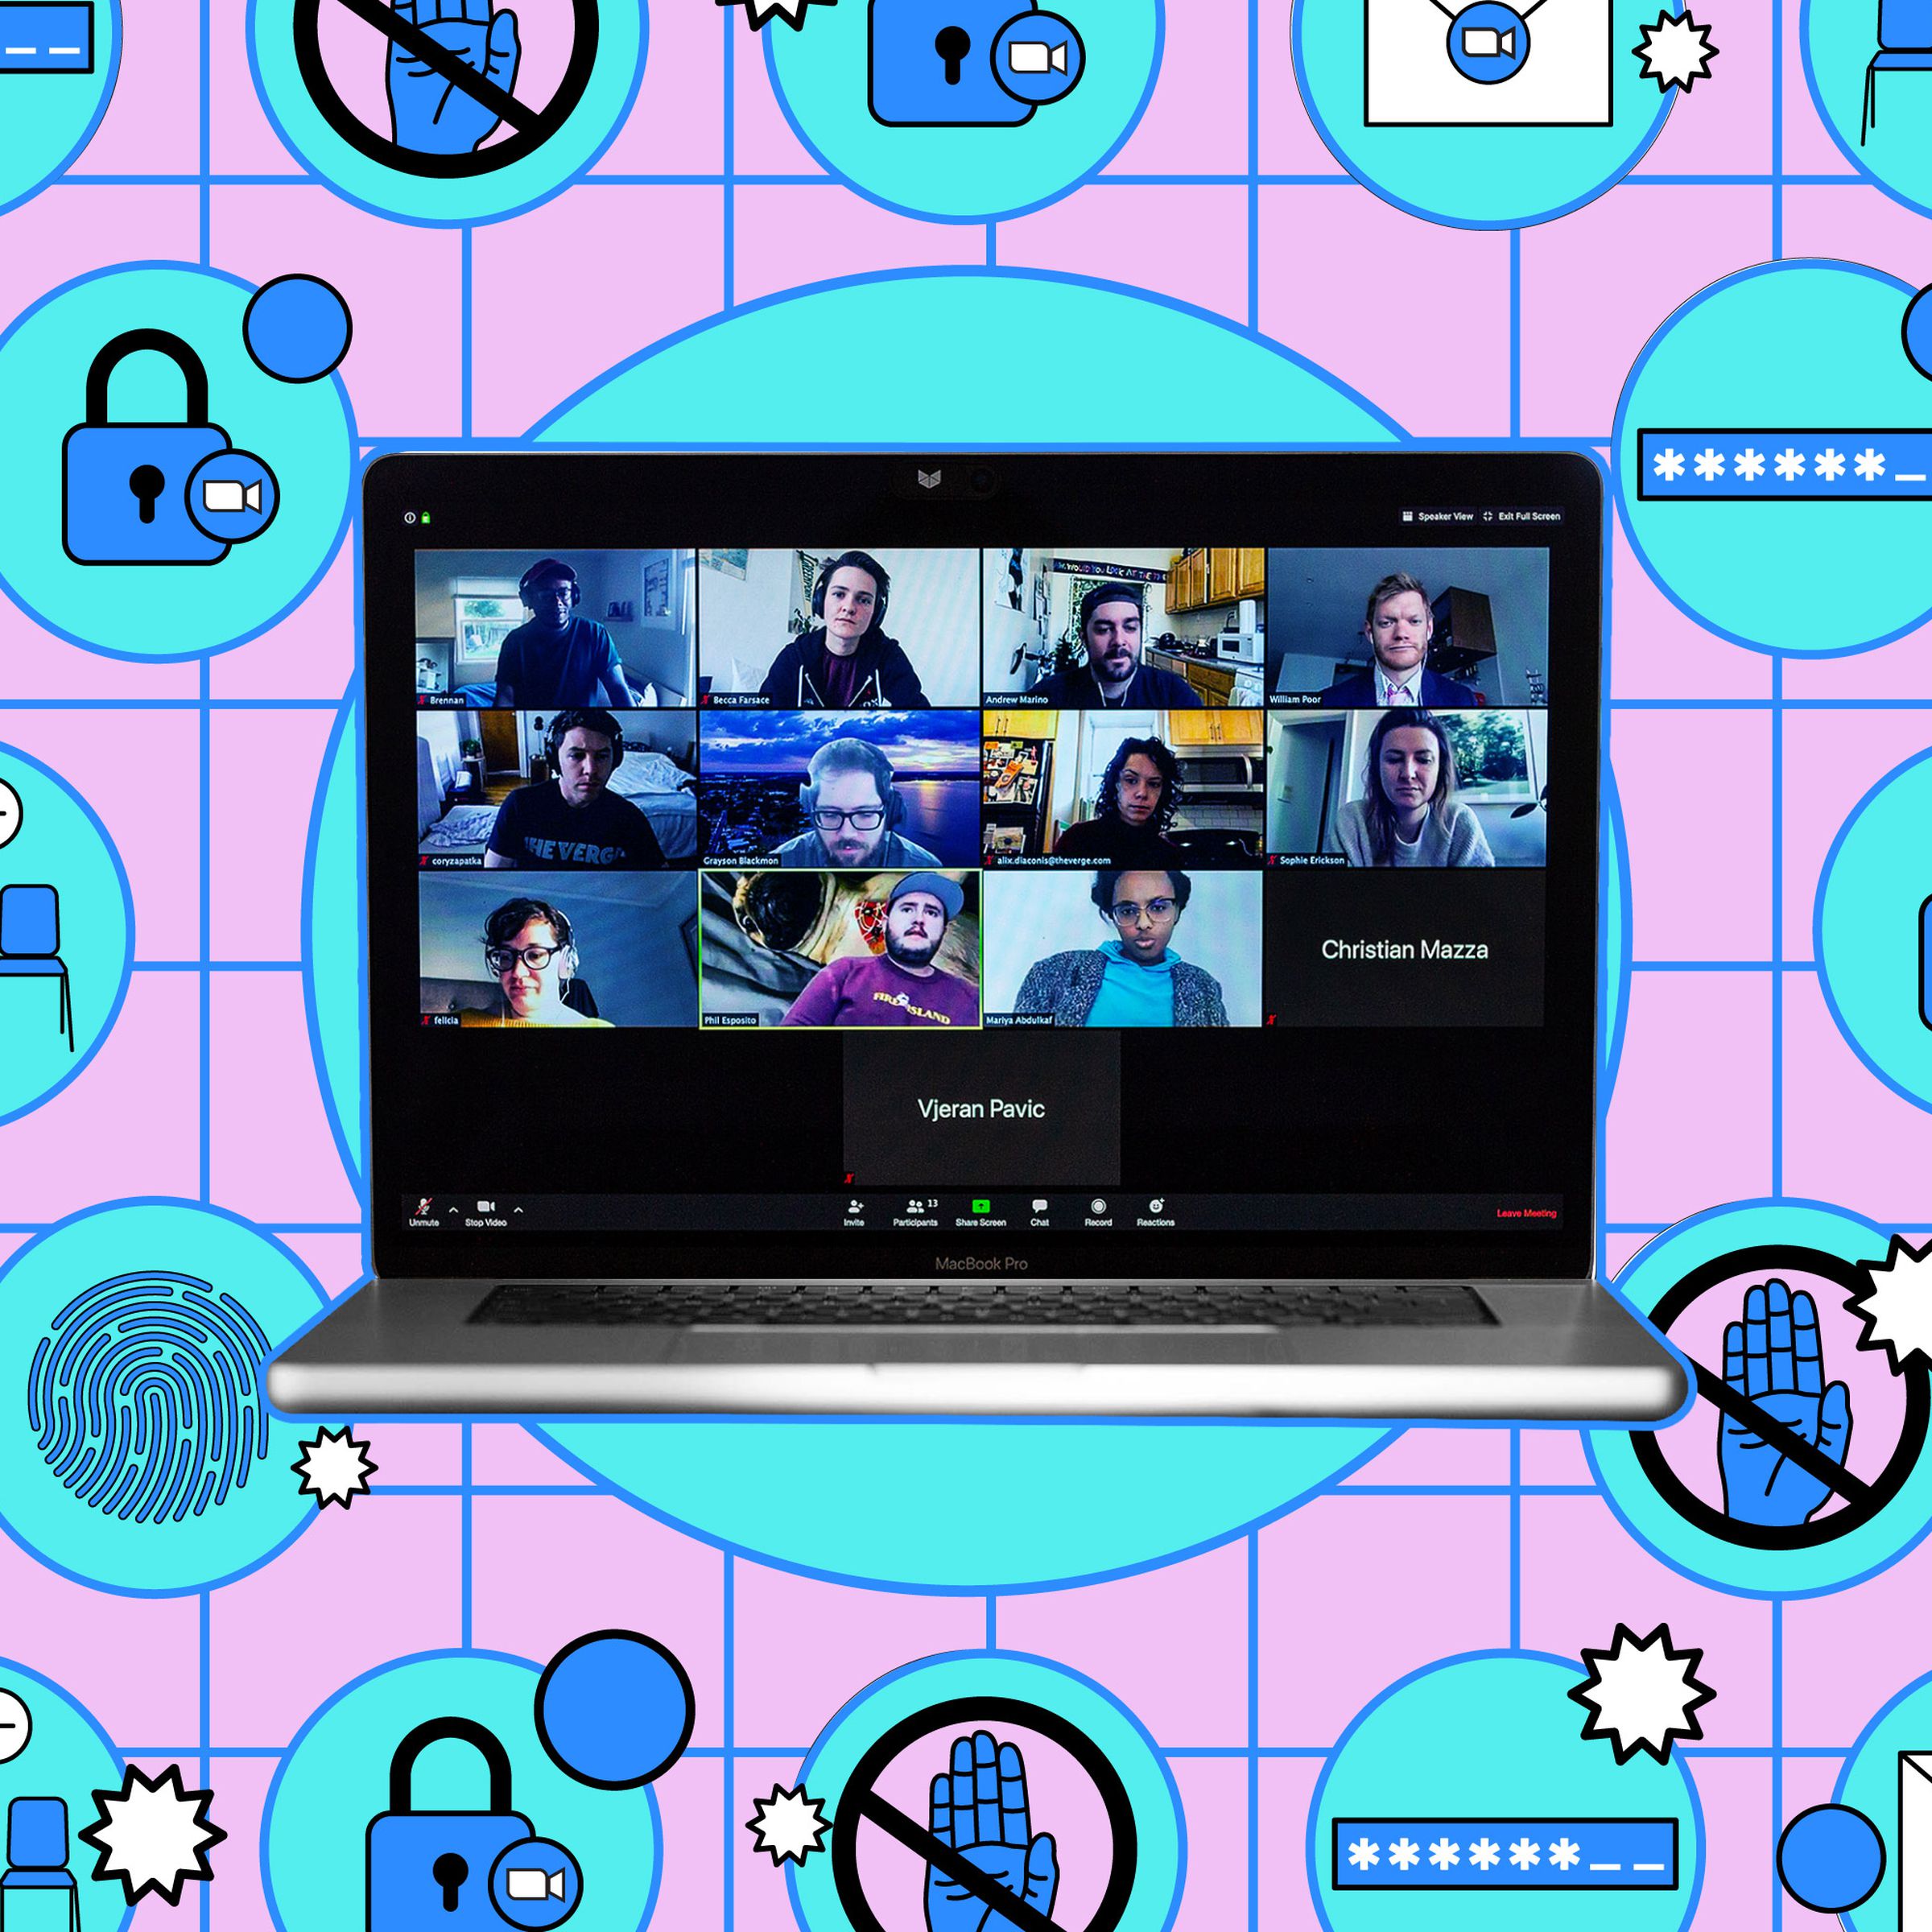 A computer showing a group of people having a video meeting; the computer is surrounded by an assortment of blue icons against a purple background.